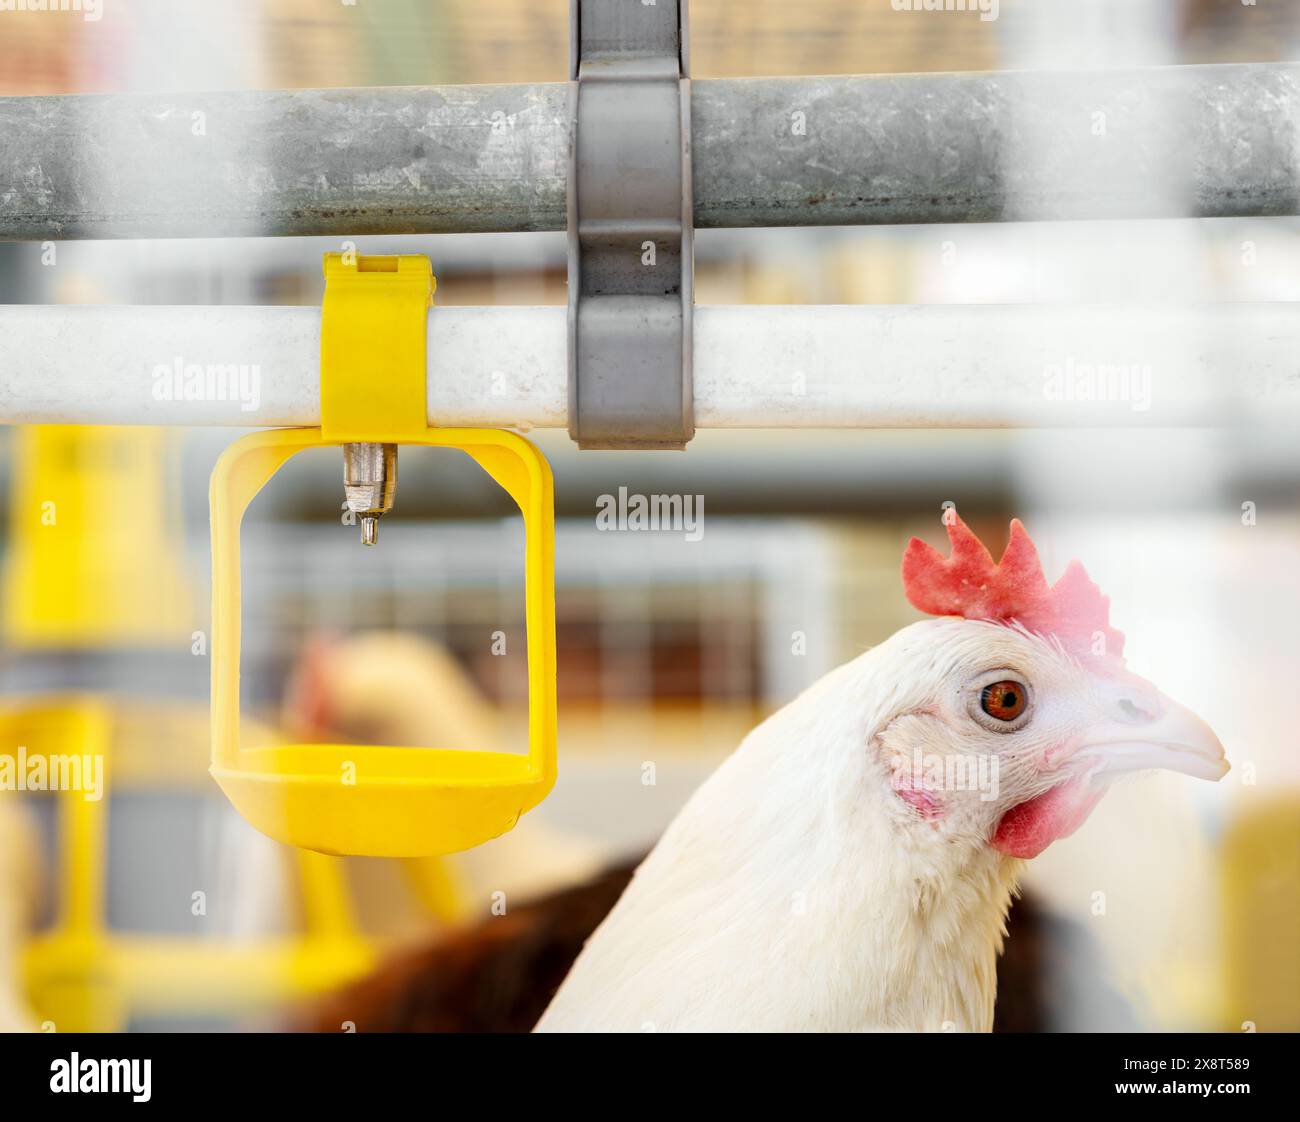 Water drinking dispenser system at a poultry farm. Dekalb white hen in egg production poultry farm. Stock Photo